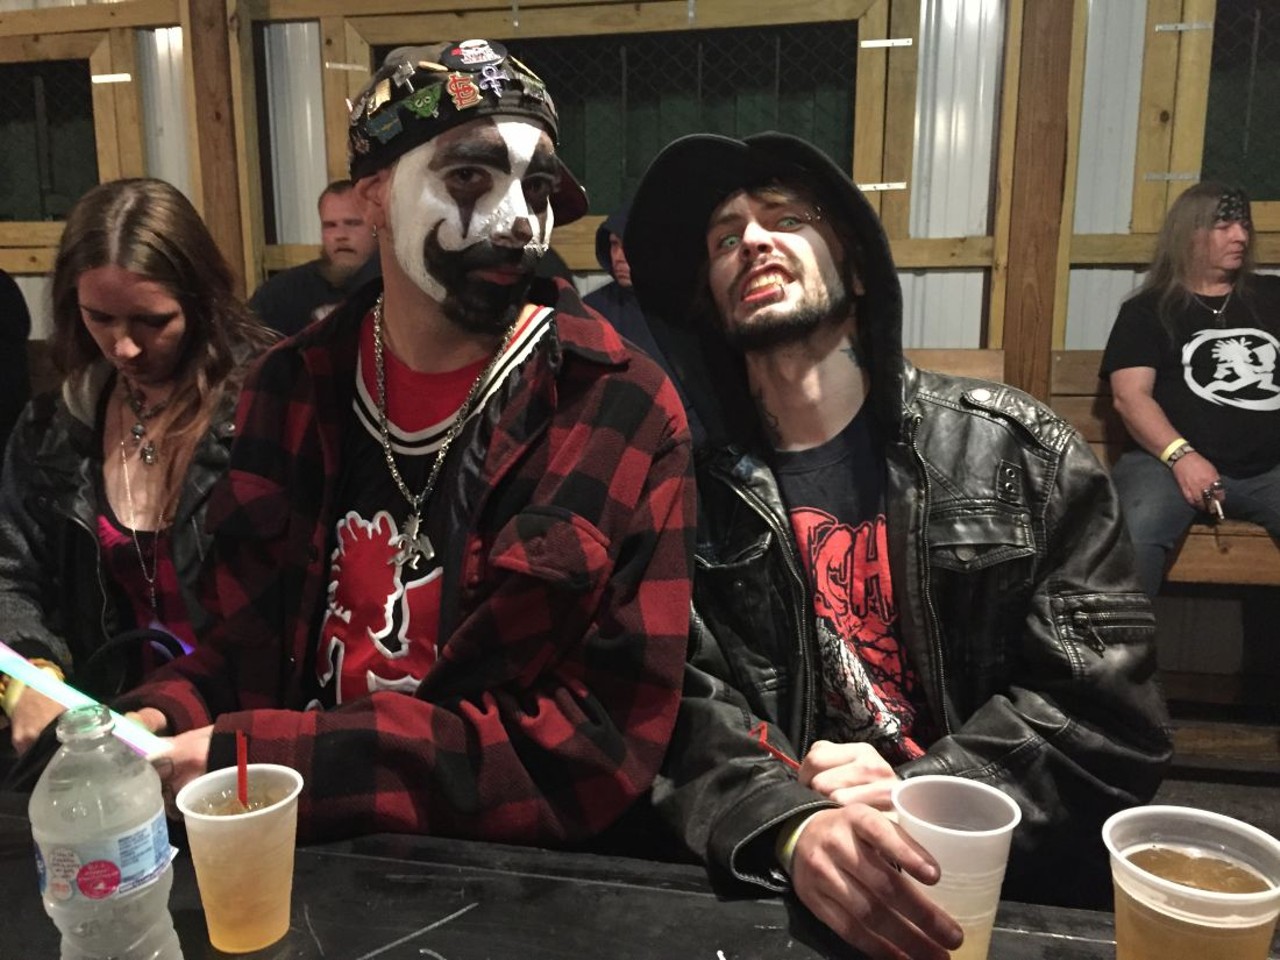 The Juggalos Came Out for Insane Clown Posse in Sauget, and It Was Lit